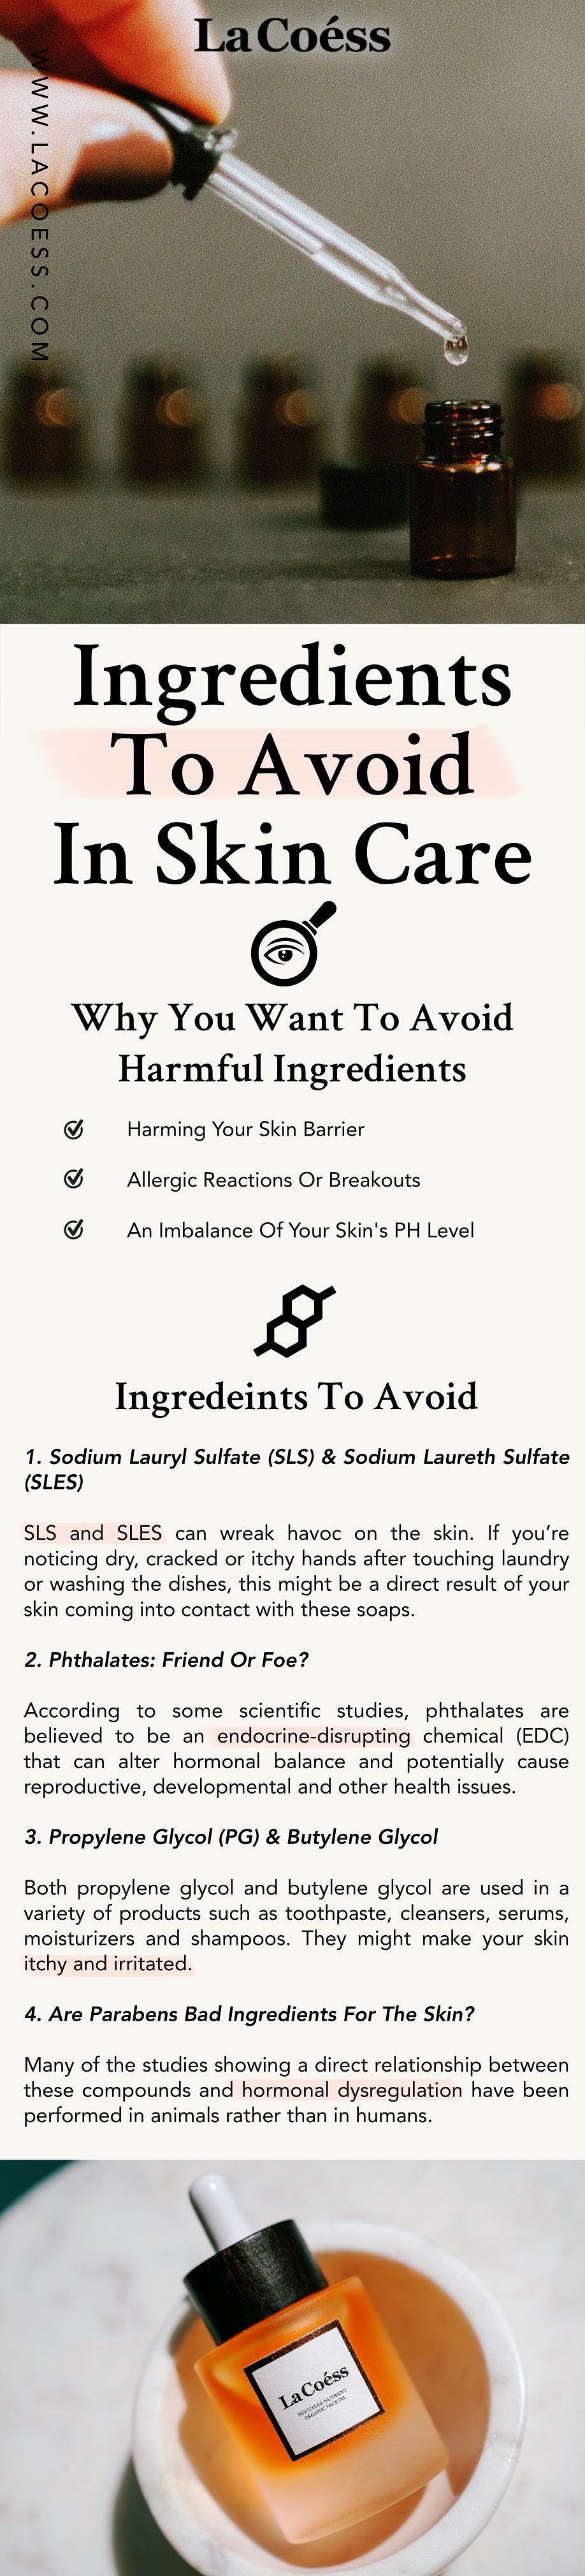 Ingredients To Avoid In Skin Care